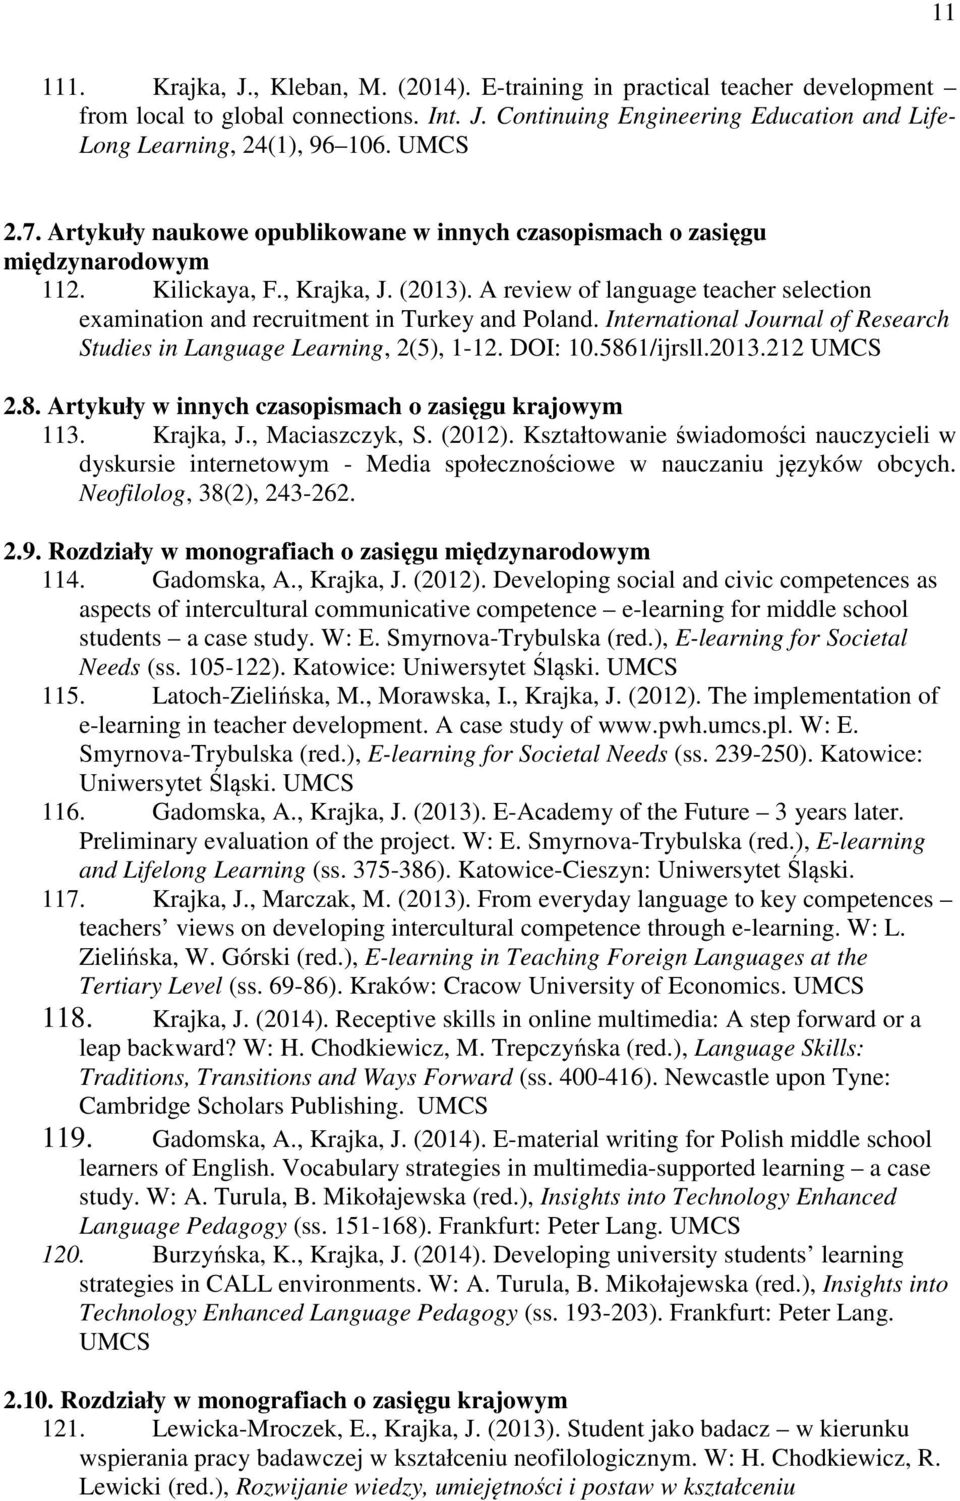 A review of language teacher selection examination and recruitment in Turkey and Poland. International Journal of Research Studies in Language Learning, 2(5), 1-12. DOI: 10.5861/ijrsll.2013.